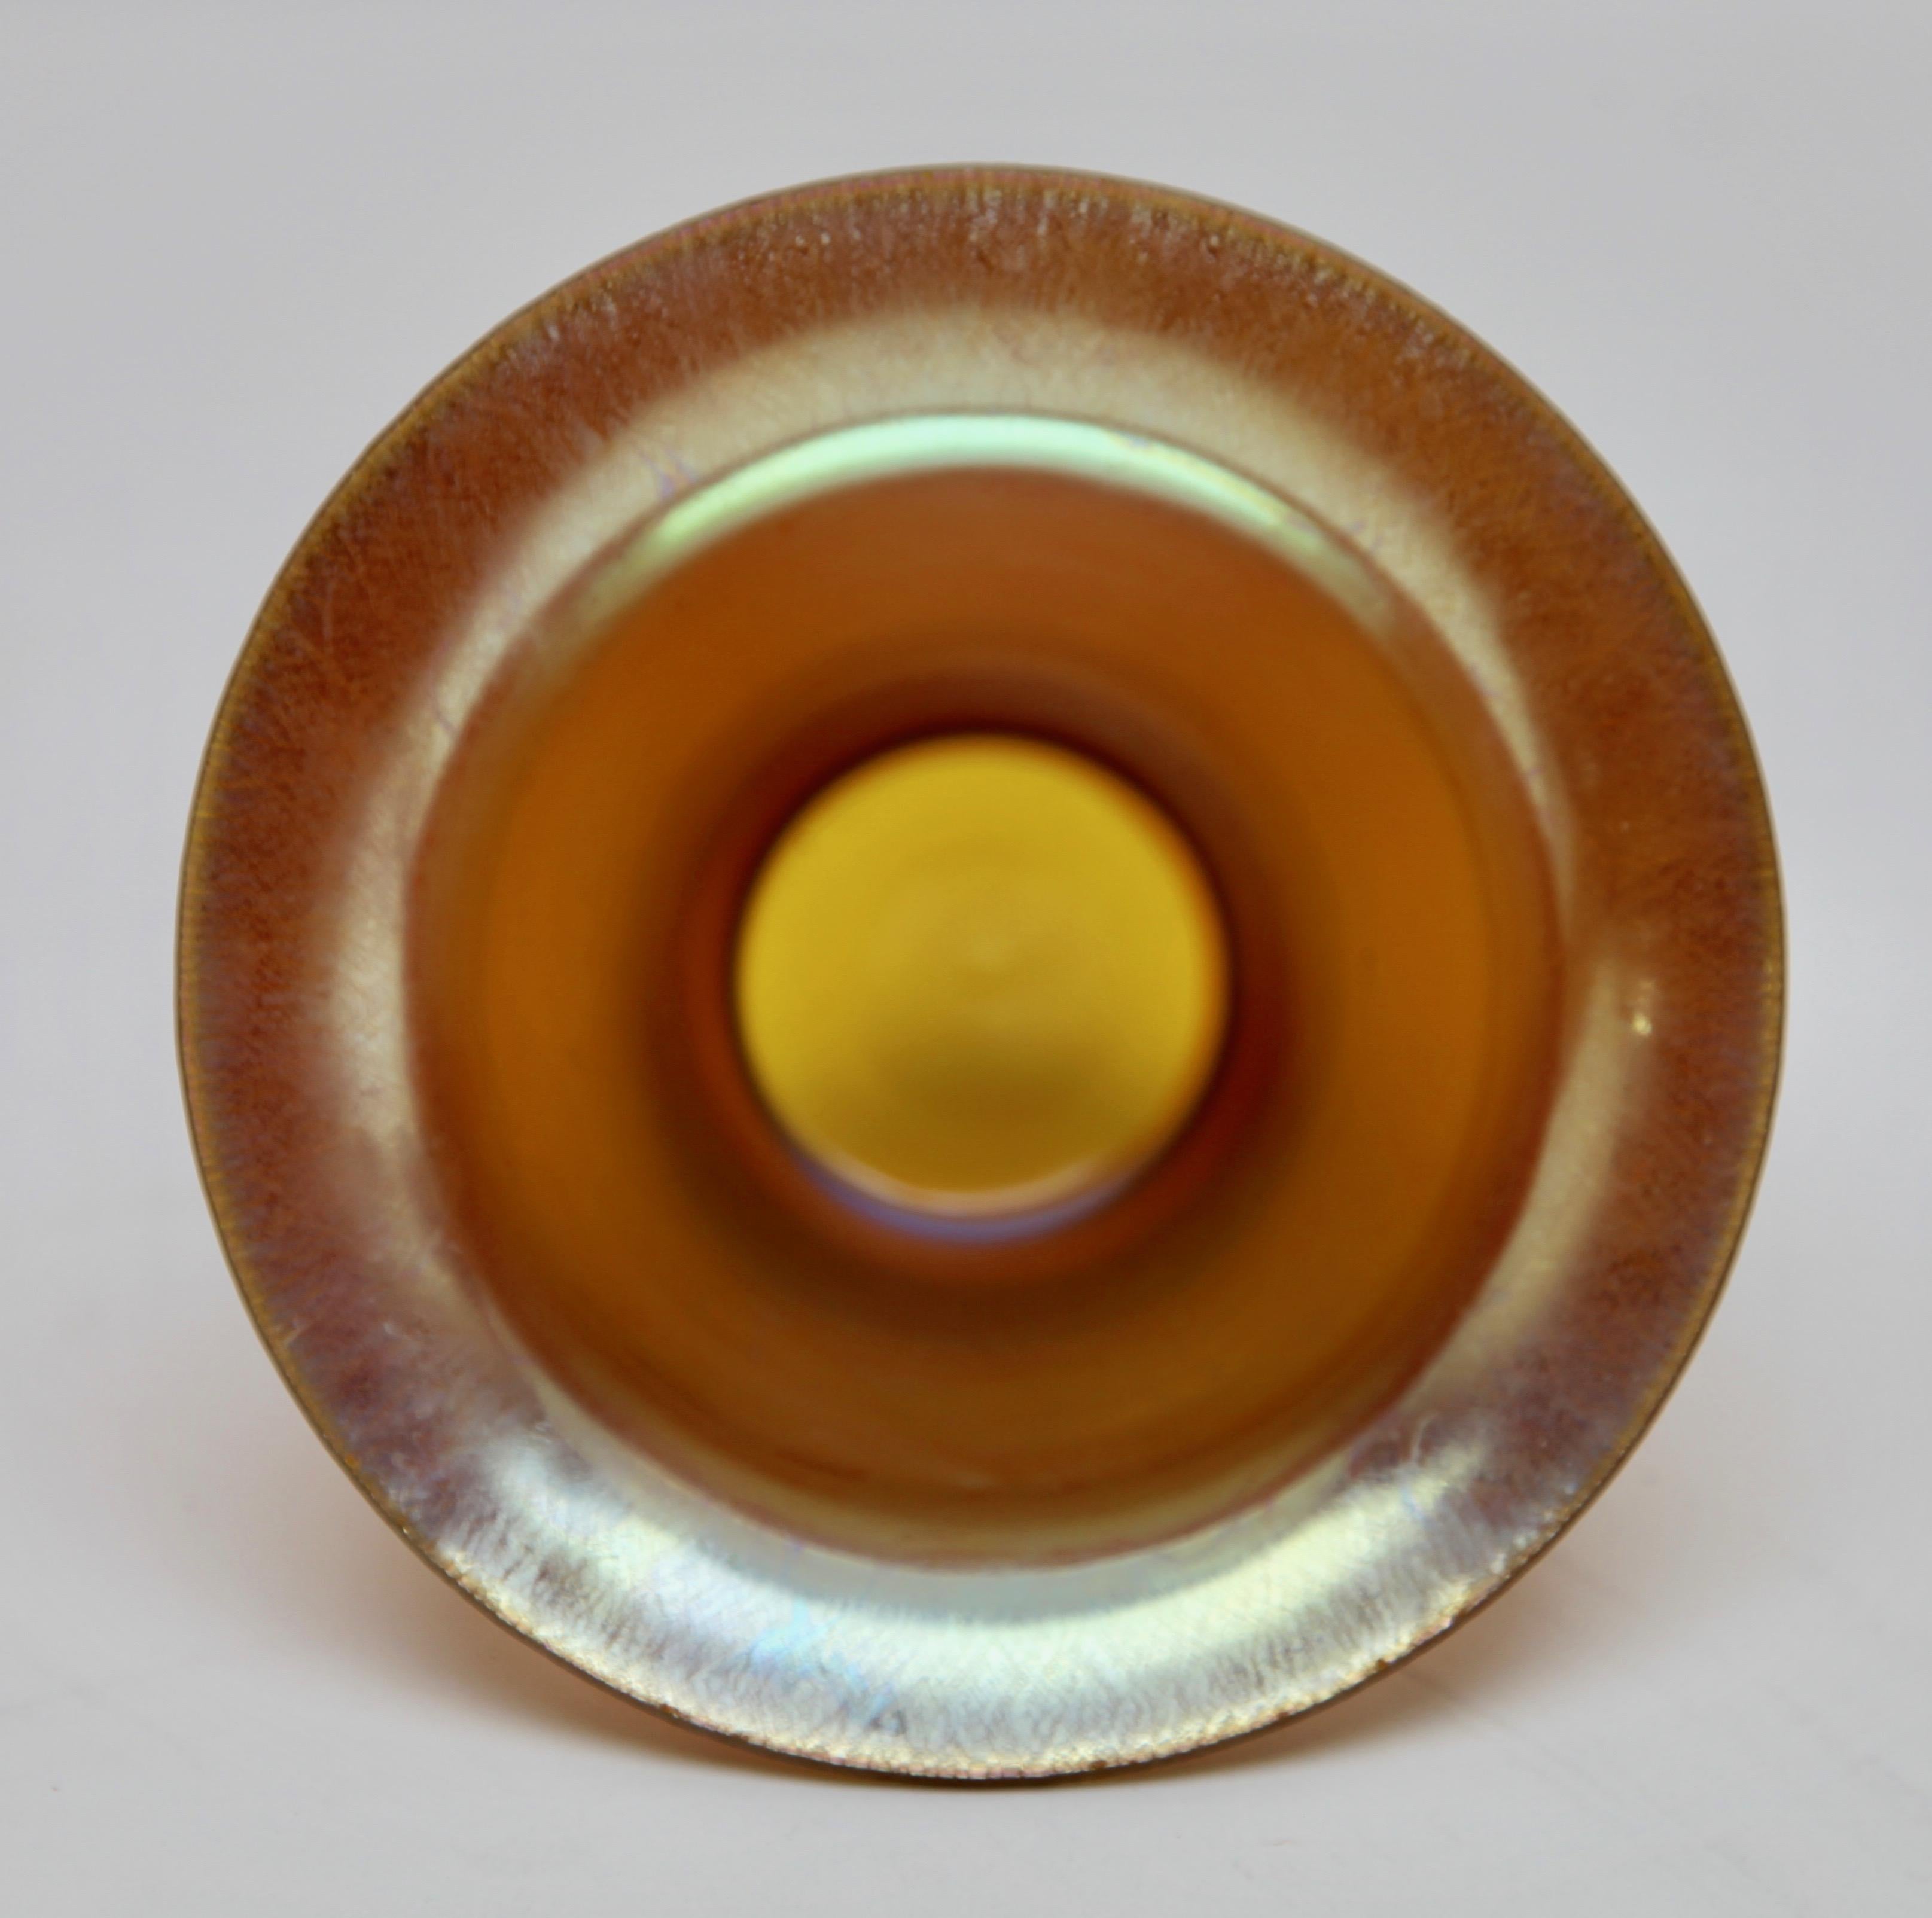 Iridescent Glass Bowl by WMF from the Myra Range In Good Condition For Sale In Verviers, BE